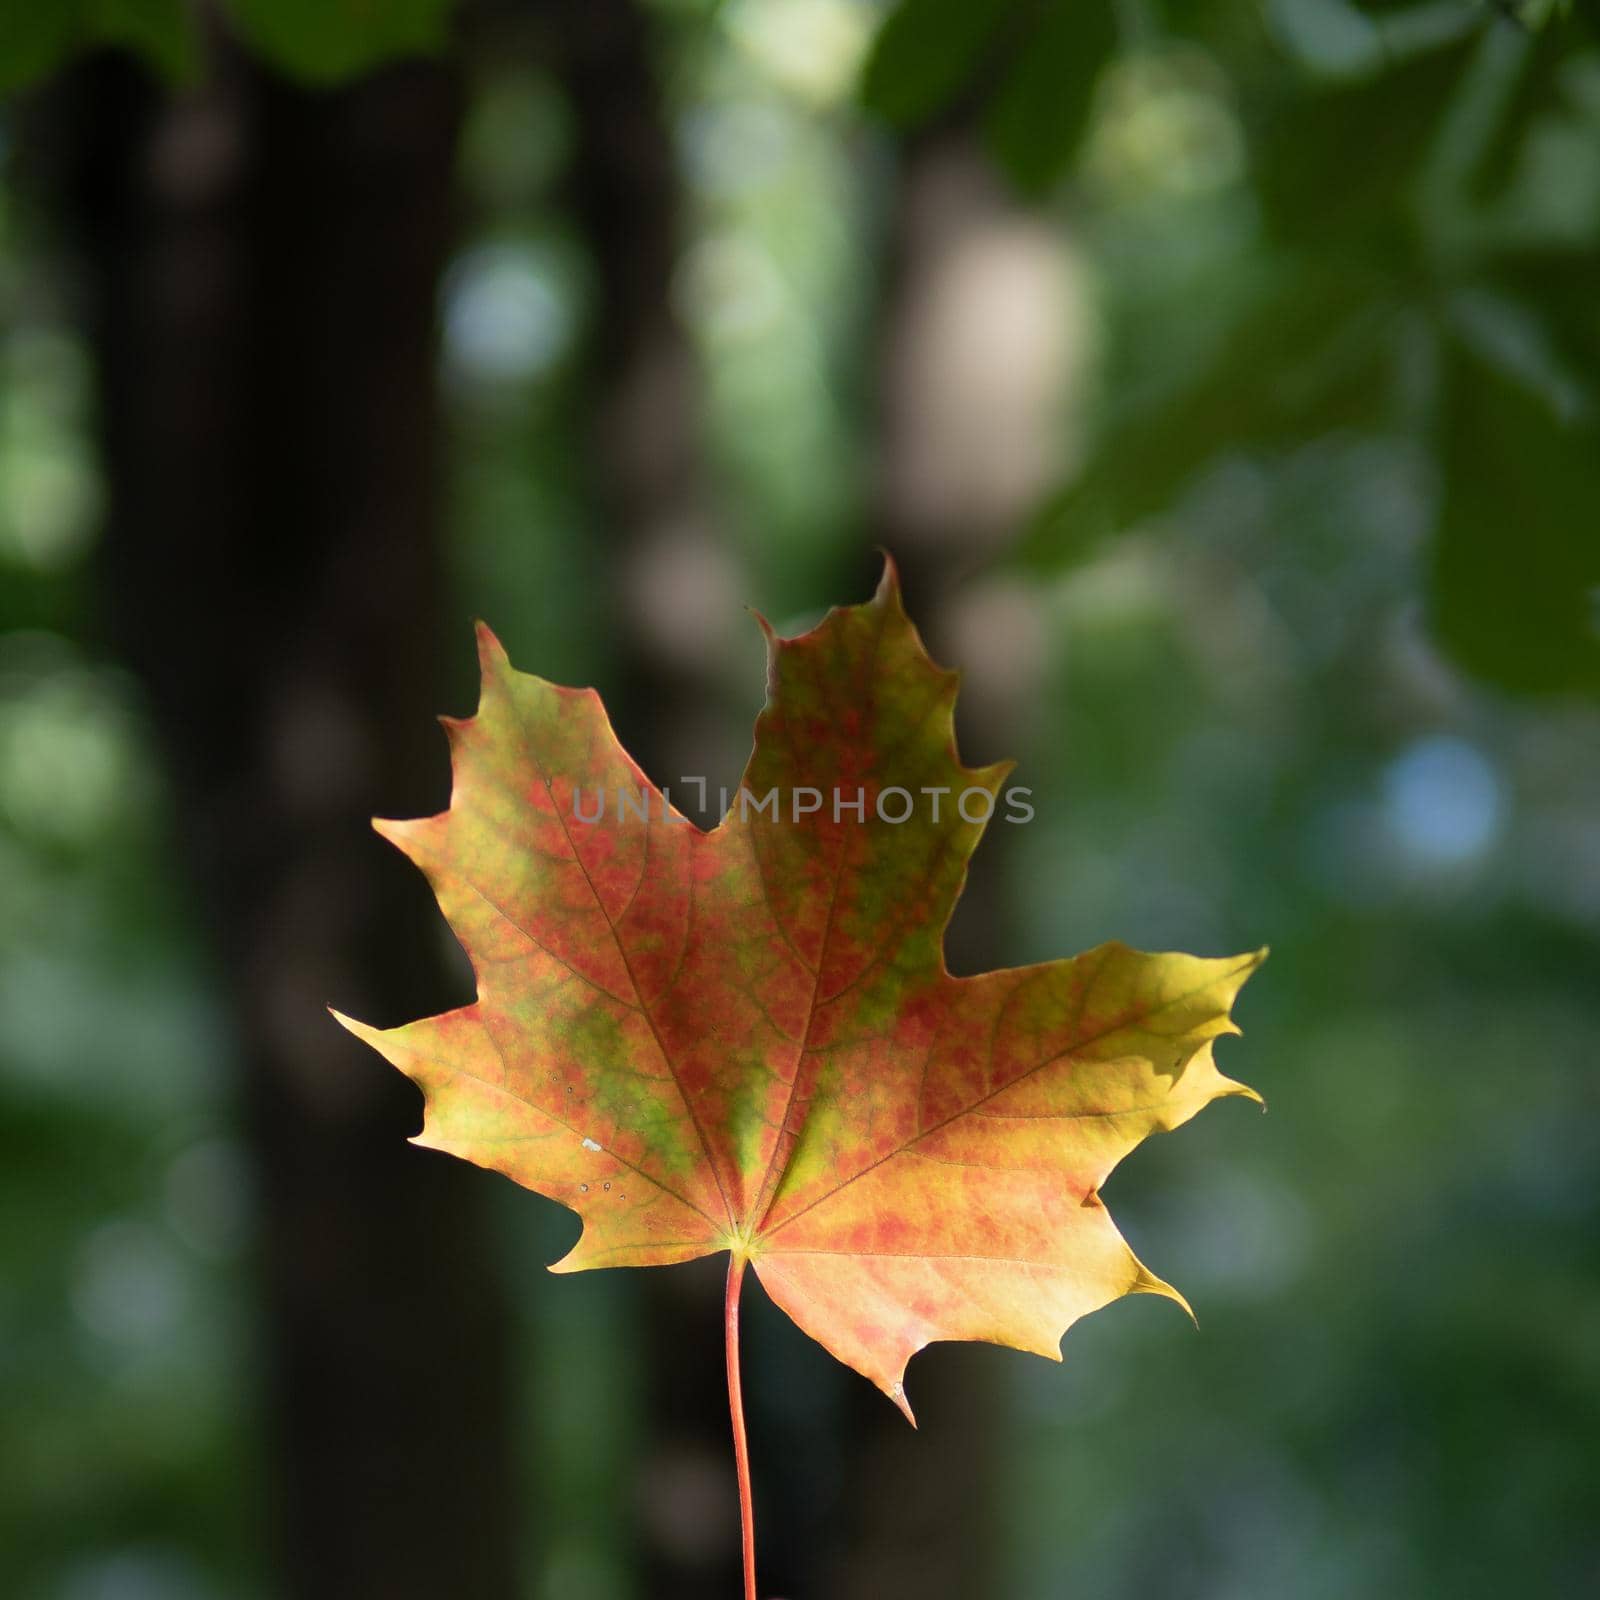 autumn background with bright yellow and red single leaf in center of dark background by NataBene